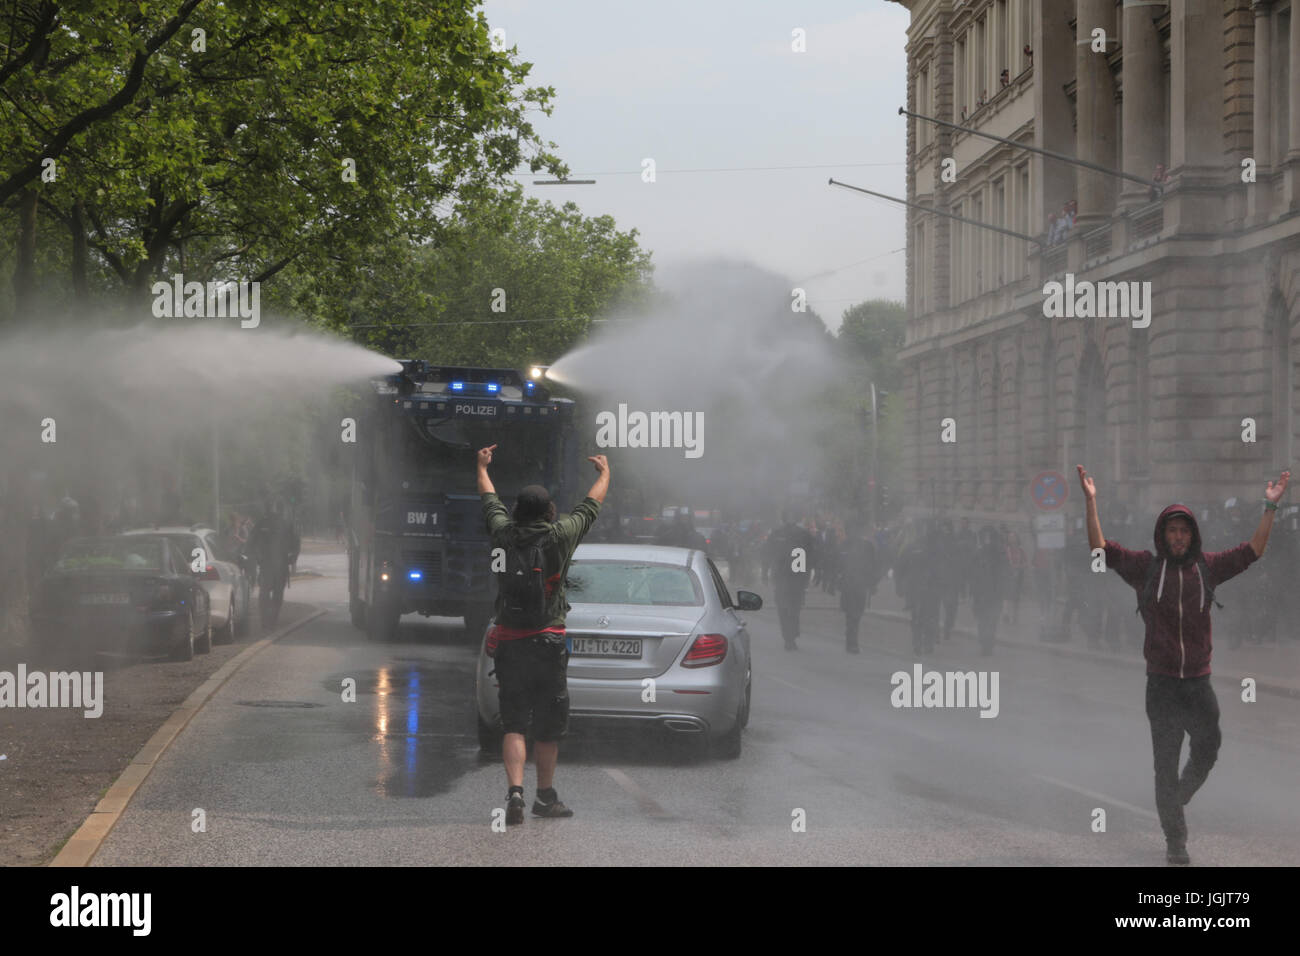 Hamburg, Germany. 07th July, 2017. G20 Summit protests in Hamburg. Watercannon opens fire to disperse protesters Credit: Conall Kearney/Alamy Live News Stock Photo